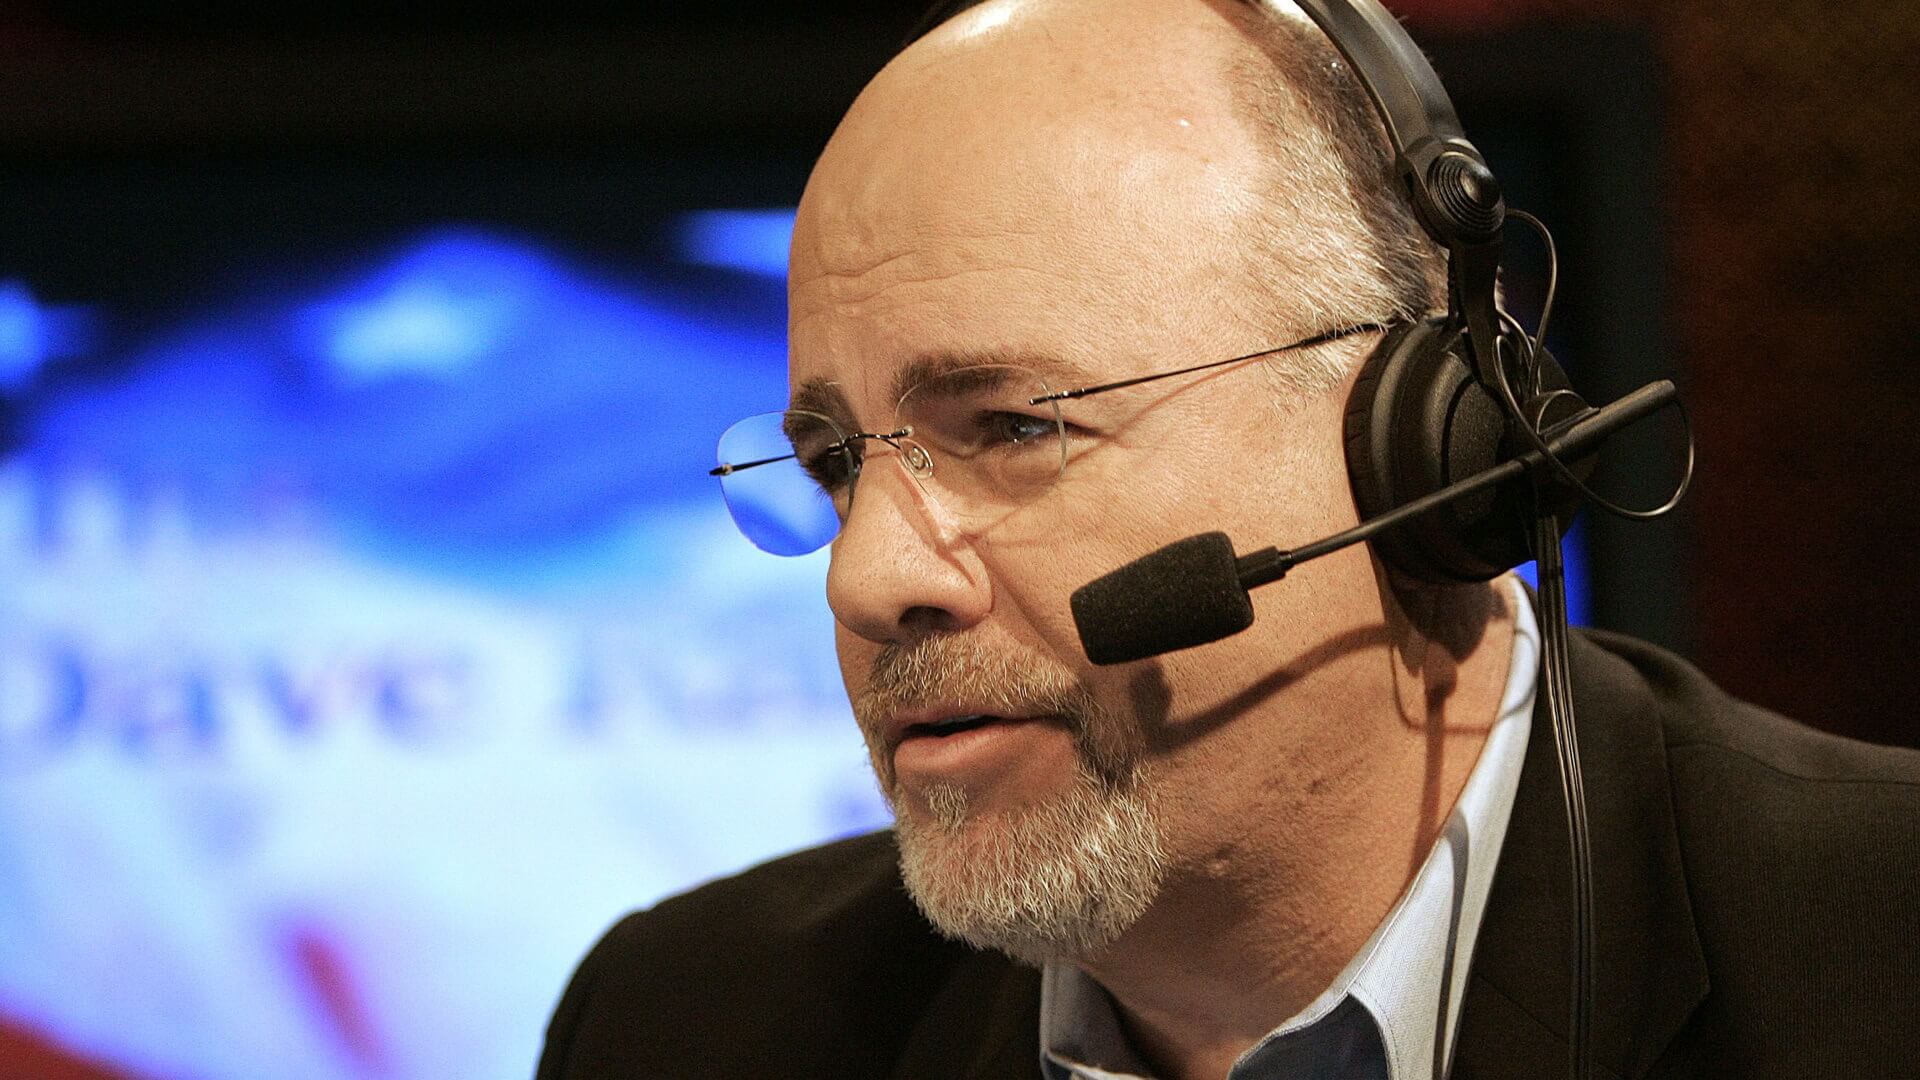 dave ramsey’s first job led to riches at 26: the most valuable money lesson he learned